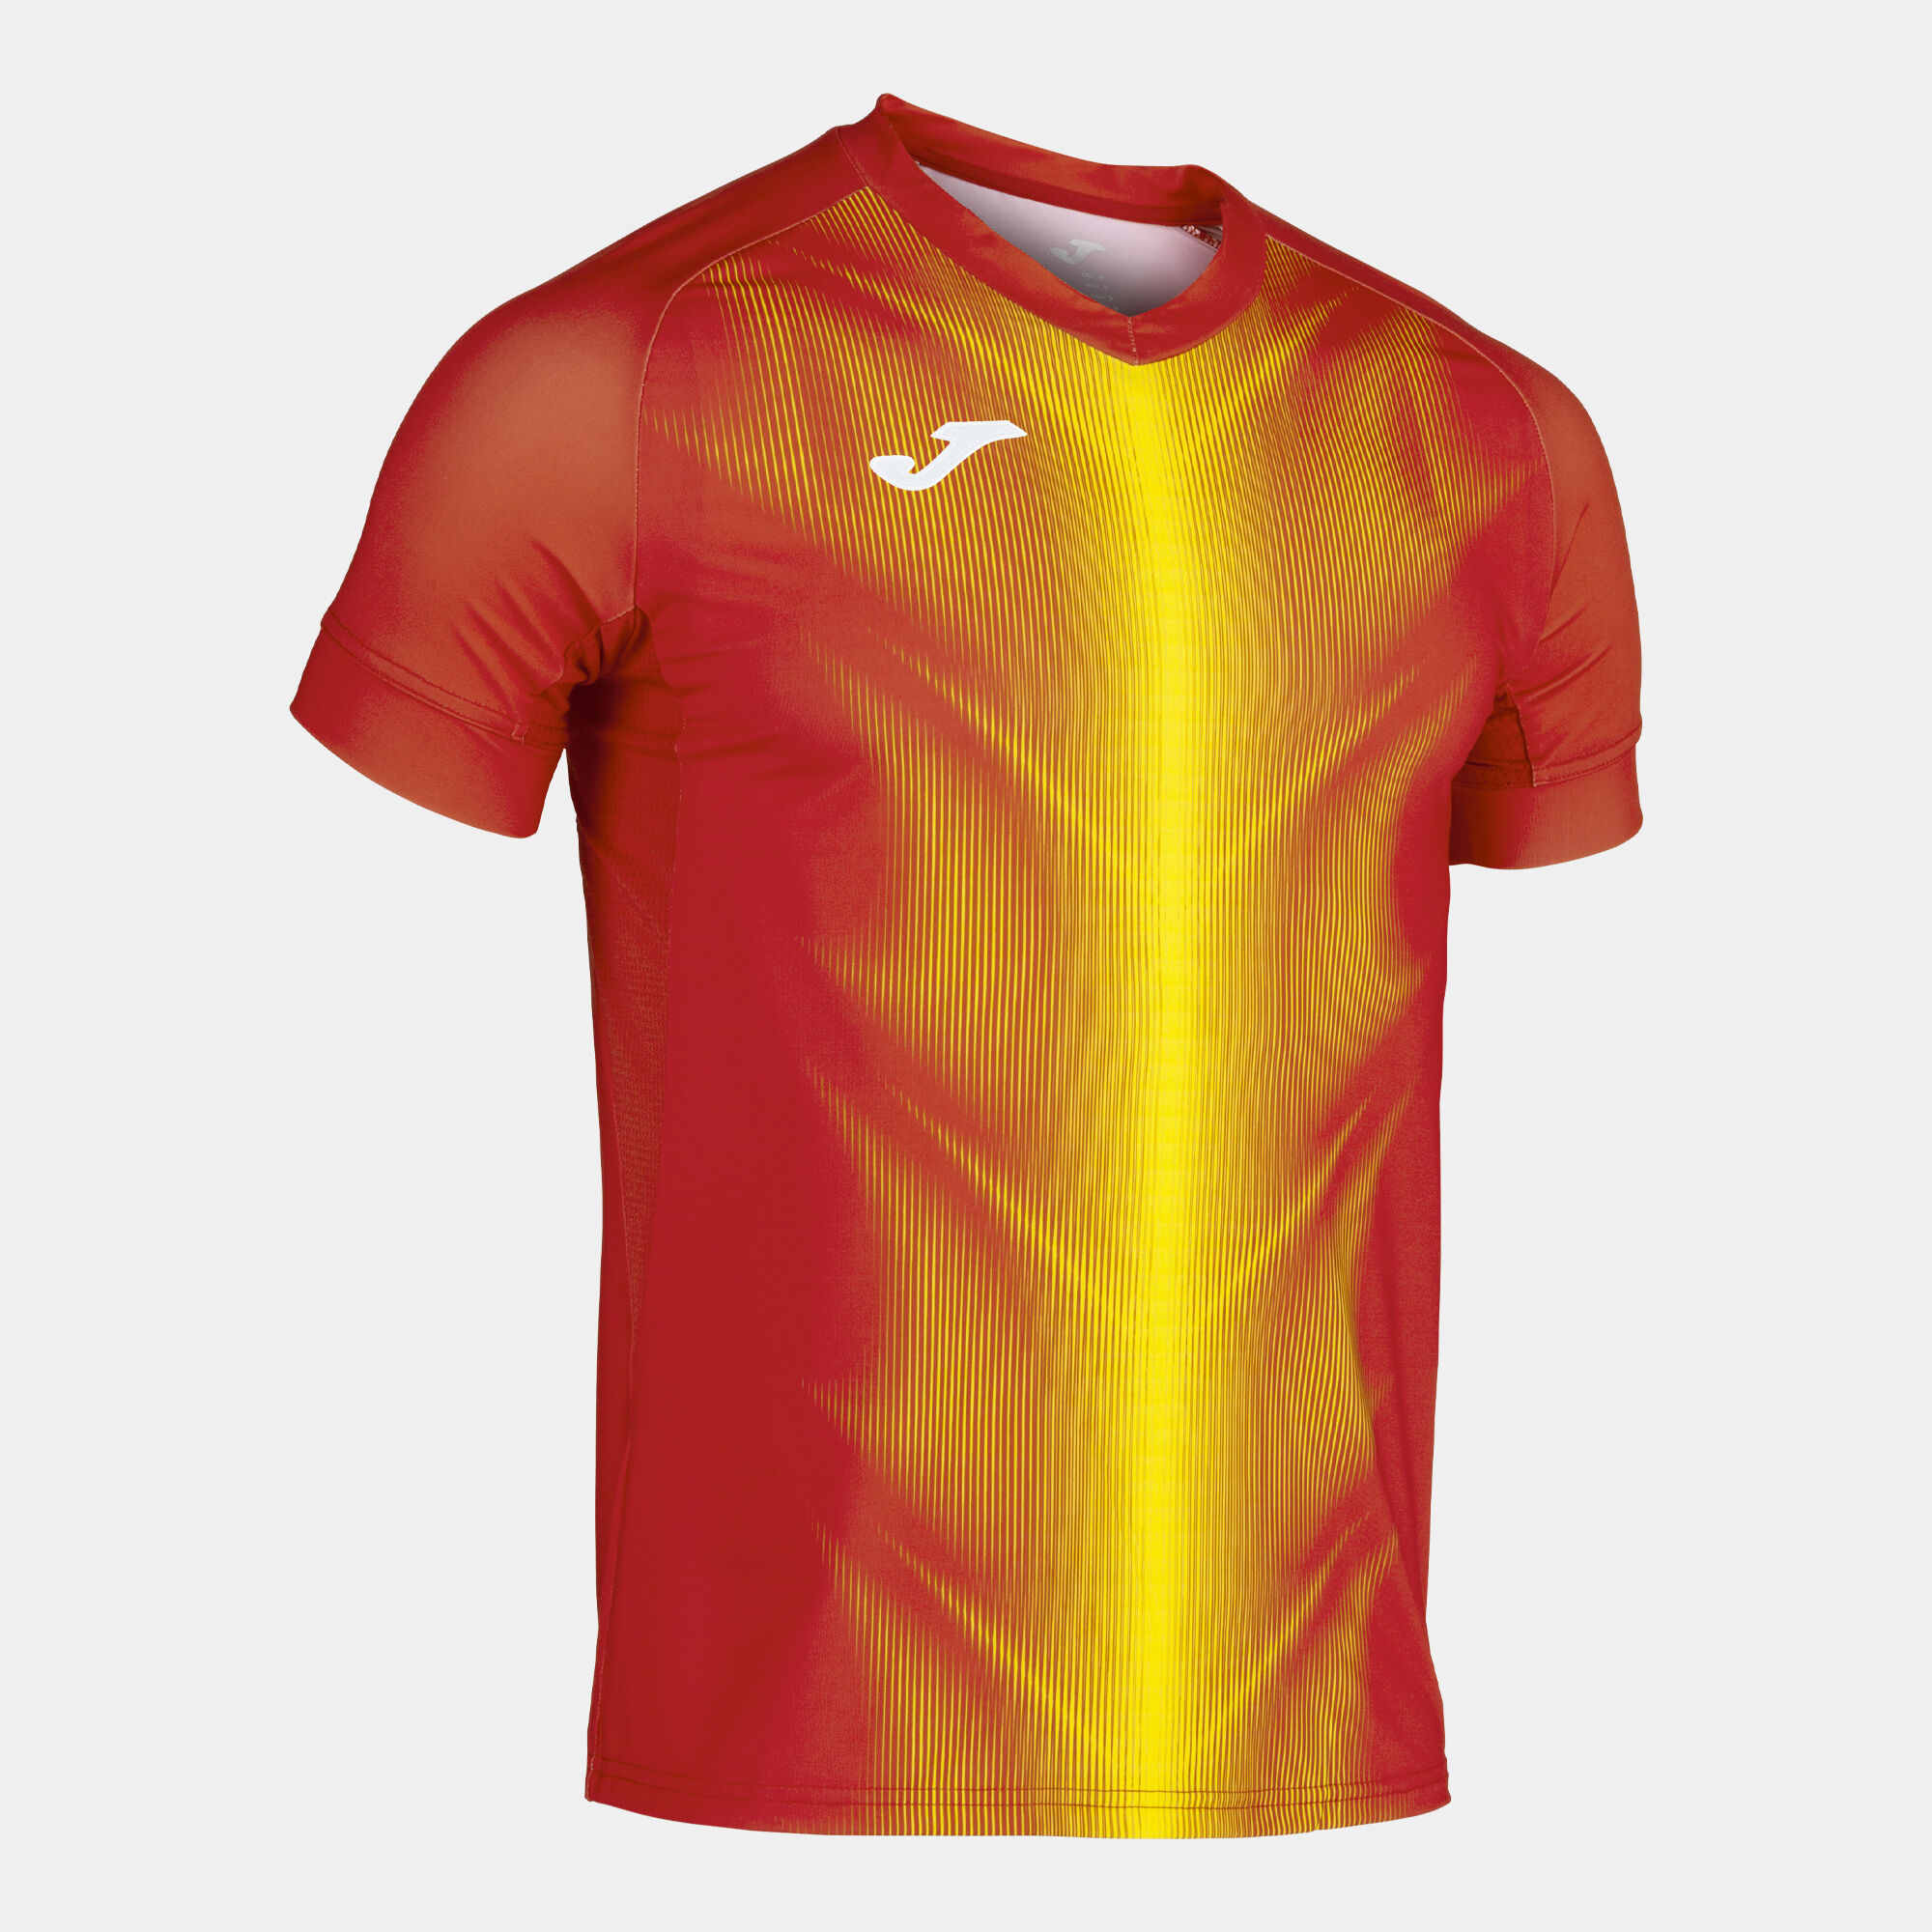 MAILLOT MANCHES COURTES HOMME OLIMPIA ROUGE JAUNE